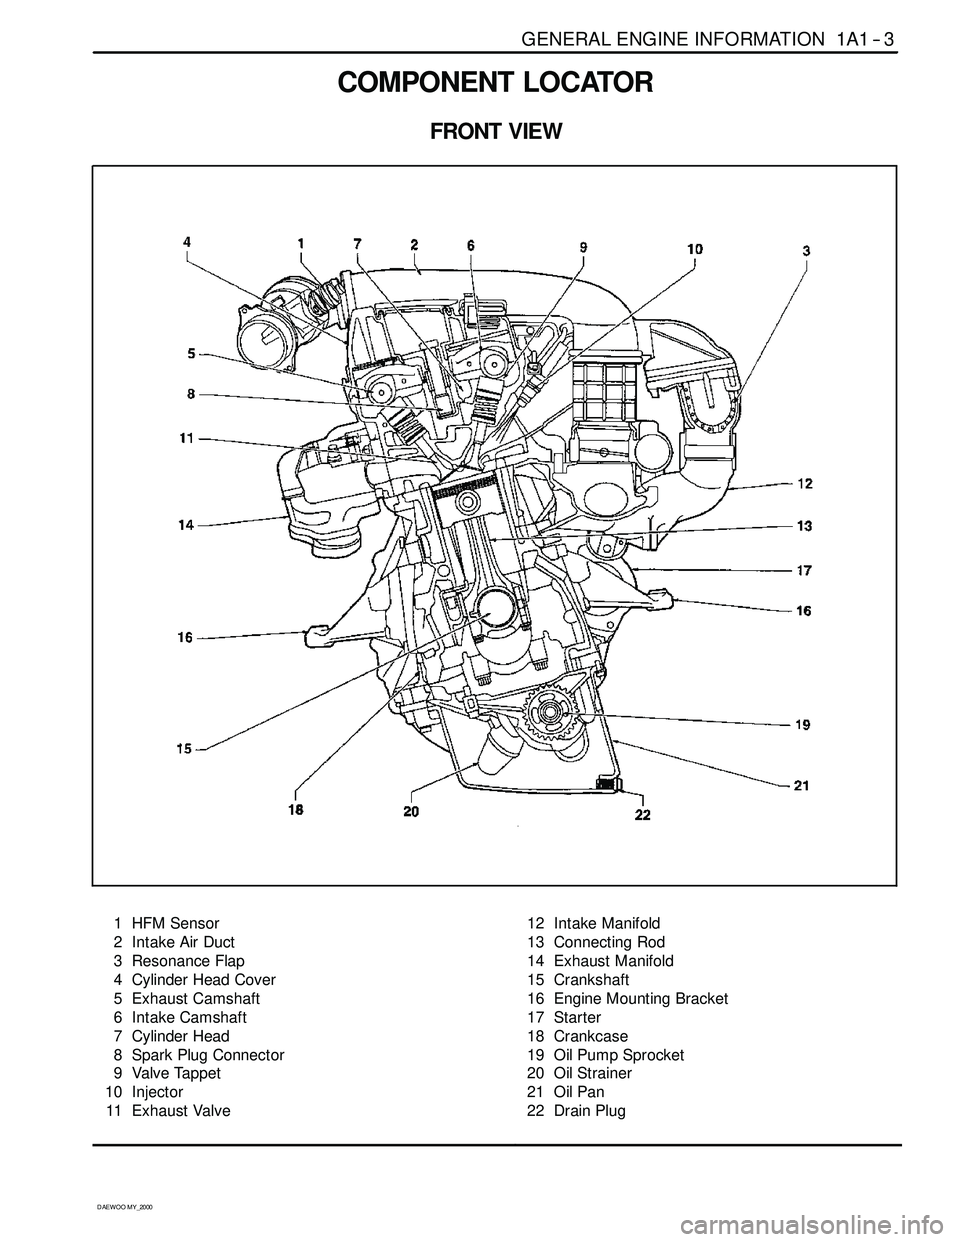 SSANGYONG KORANDO 1997  Service Repair Manual GENERAL ENGINE INFORMATION 1A1 -- 3
D AEW OO M Y_2000
COMPONENT LOCATOR
FRONT VIEW
1 HFM Sensor
2 Intake Air Duct
3 Resonance Flap
4 Cylinder Head Cover
5 Exhaust Camshaft
6 Intake Camshaft
7 Cylinder